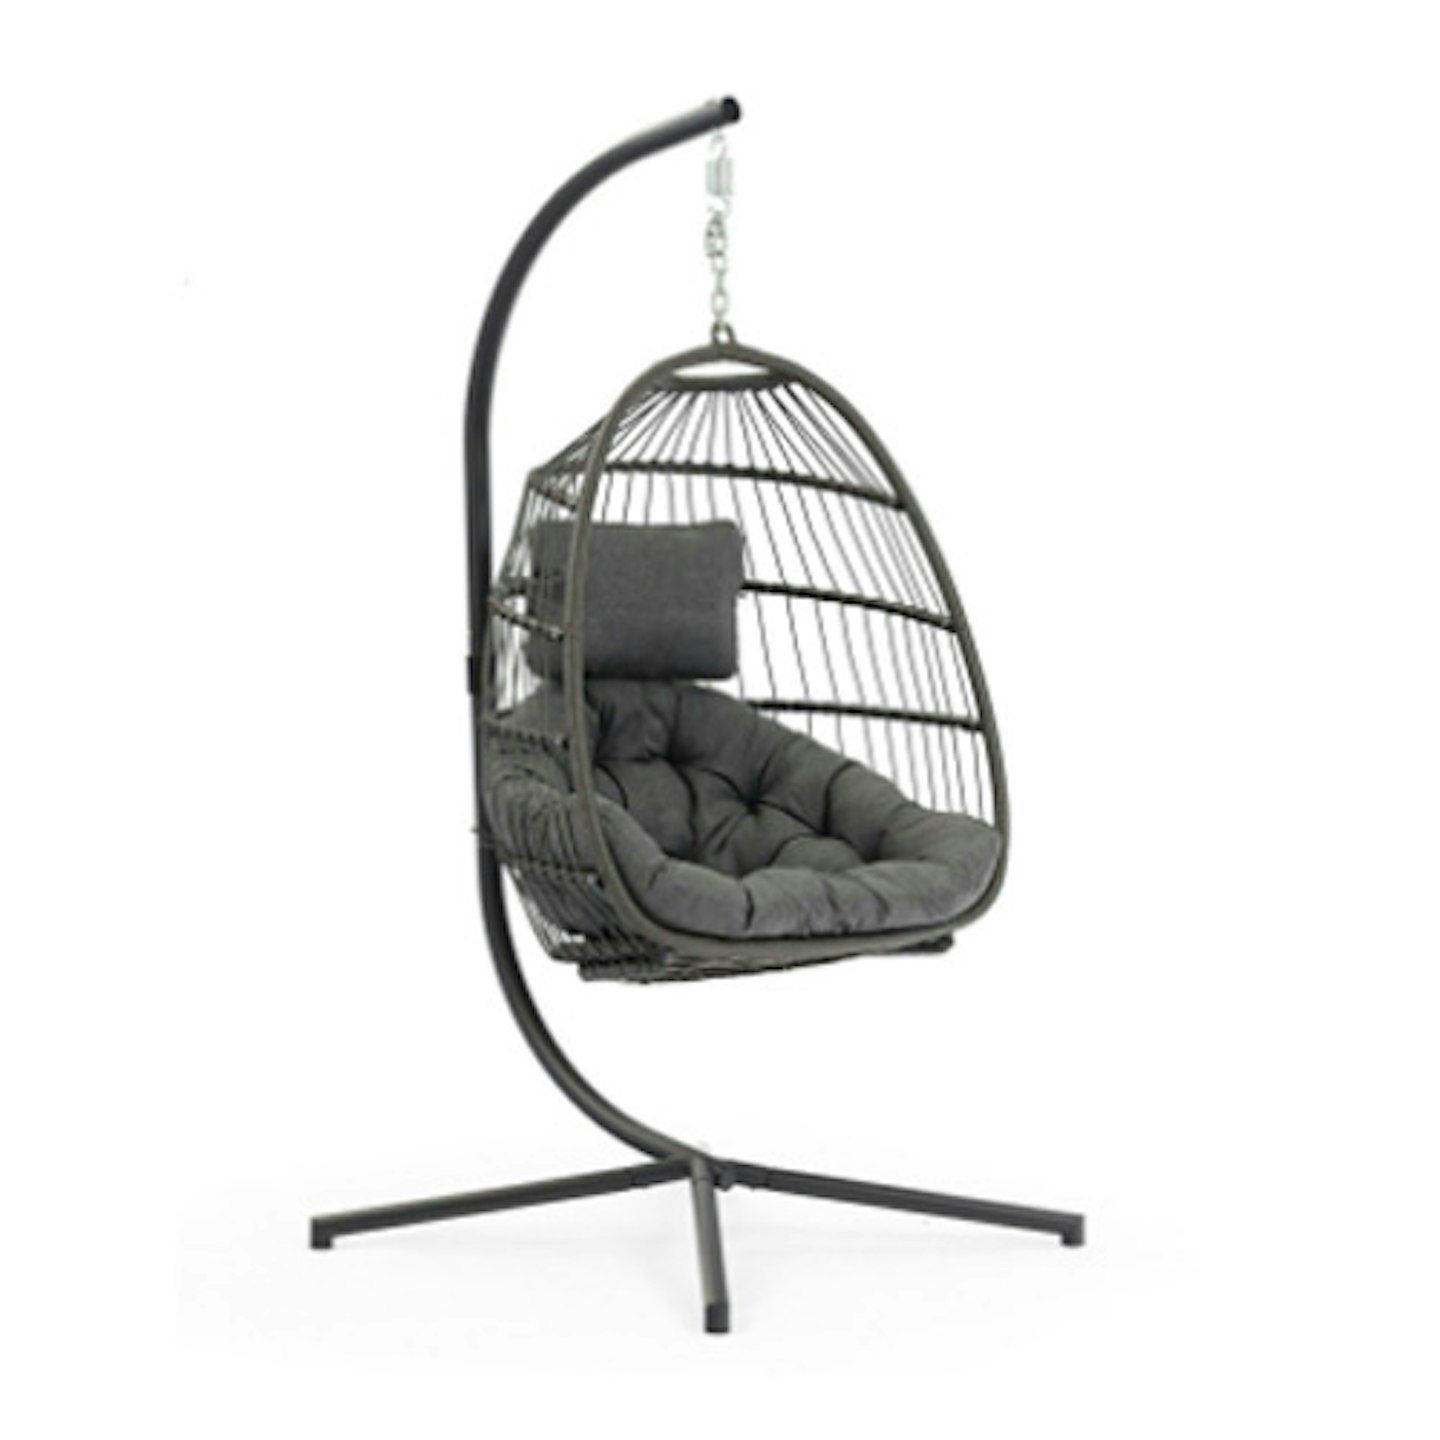 New Hampshire Foldable Hanging Chair